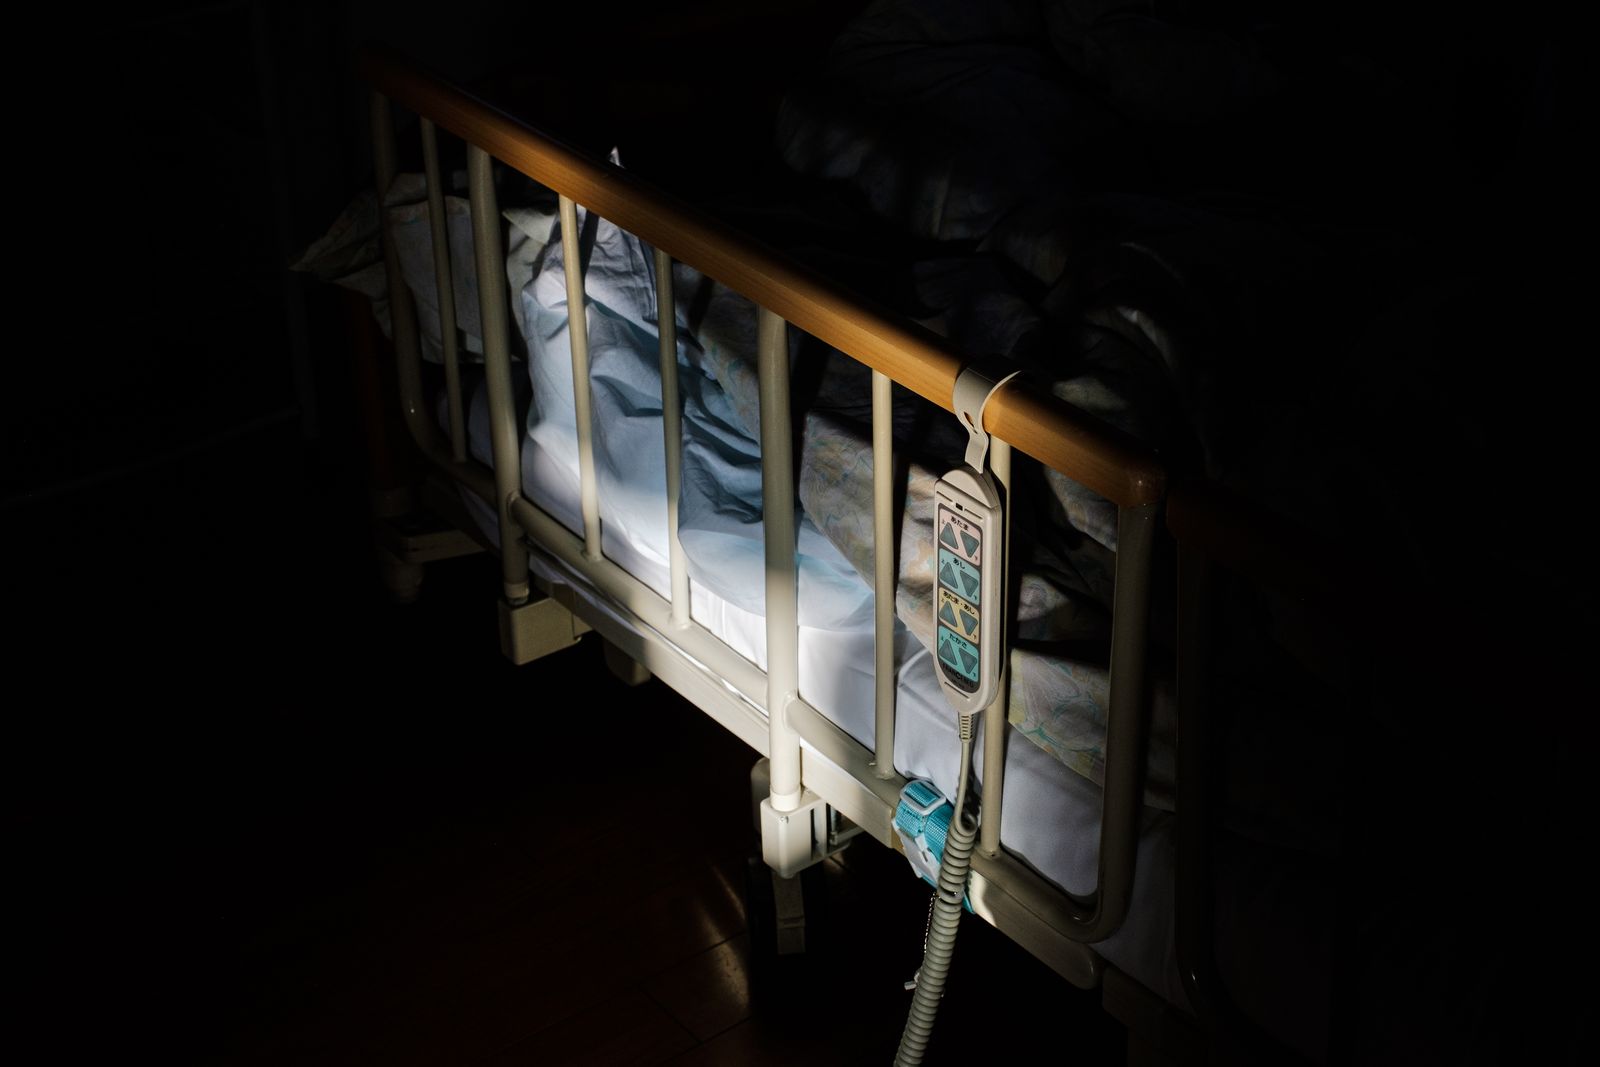 © Yuki Iwamura - The bed frame of the cancer patient is lit by the sunlight on November 20th, 2019 at Aiwa Hospice in Nagano, Japan.